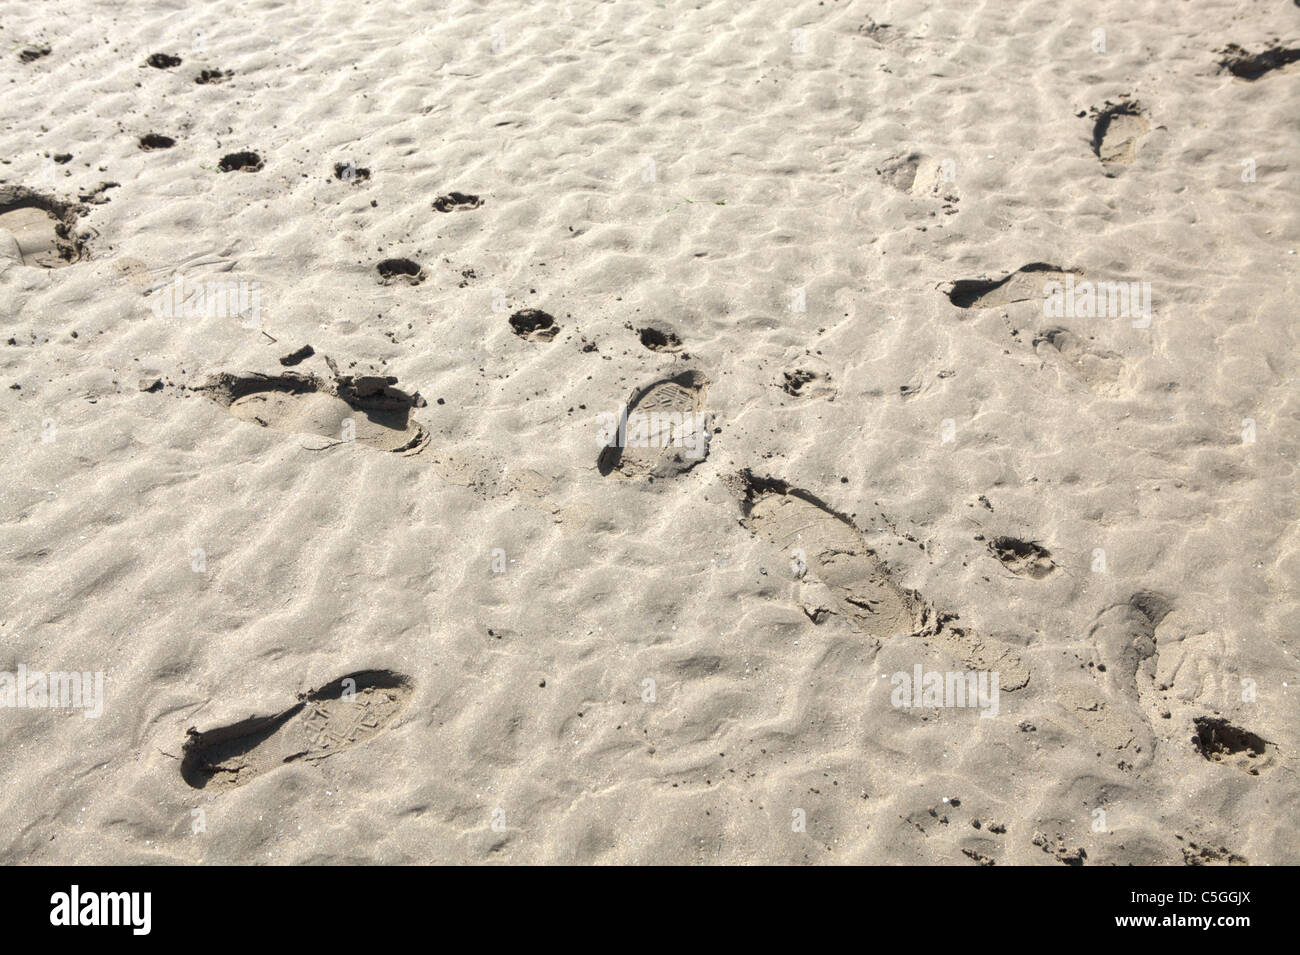 Human and Canine footprints in sand Stock Photo - Alamy